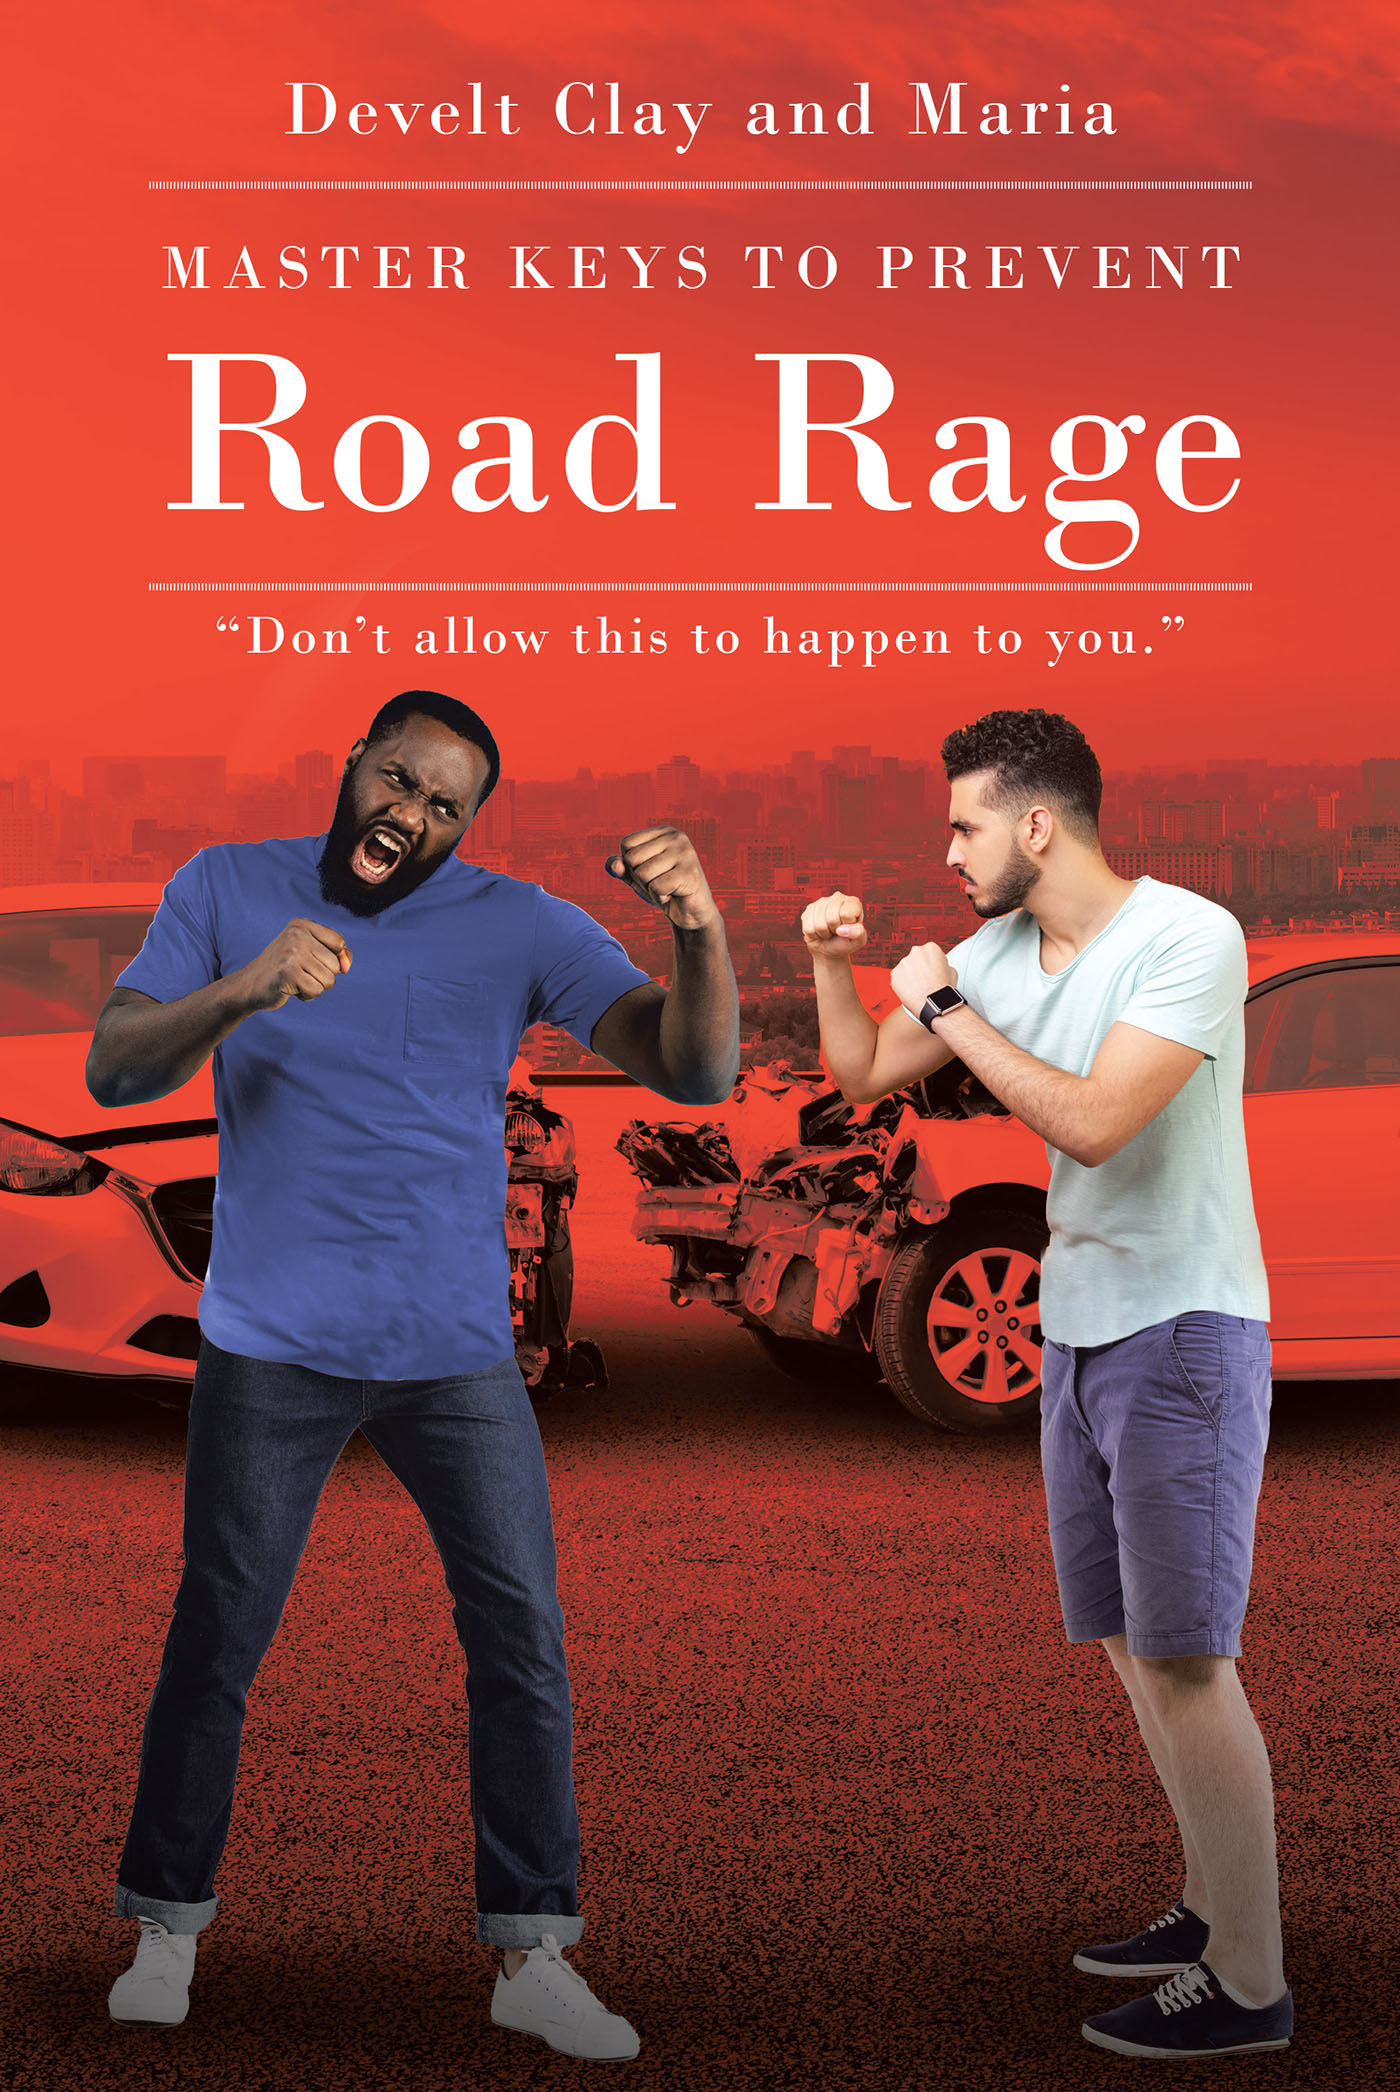 Authors Develt Clay and Maria’s New Book "Master Keys to Prevent Road Rage" Explores the Key Steps Required to Helping Drivers of All Vehicles Master and Avoid Road Rage